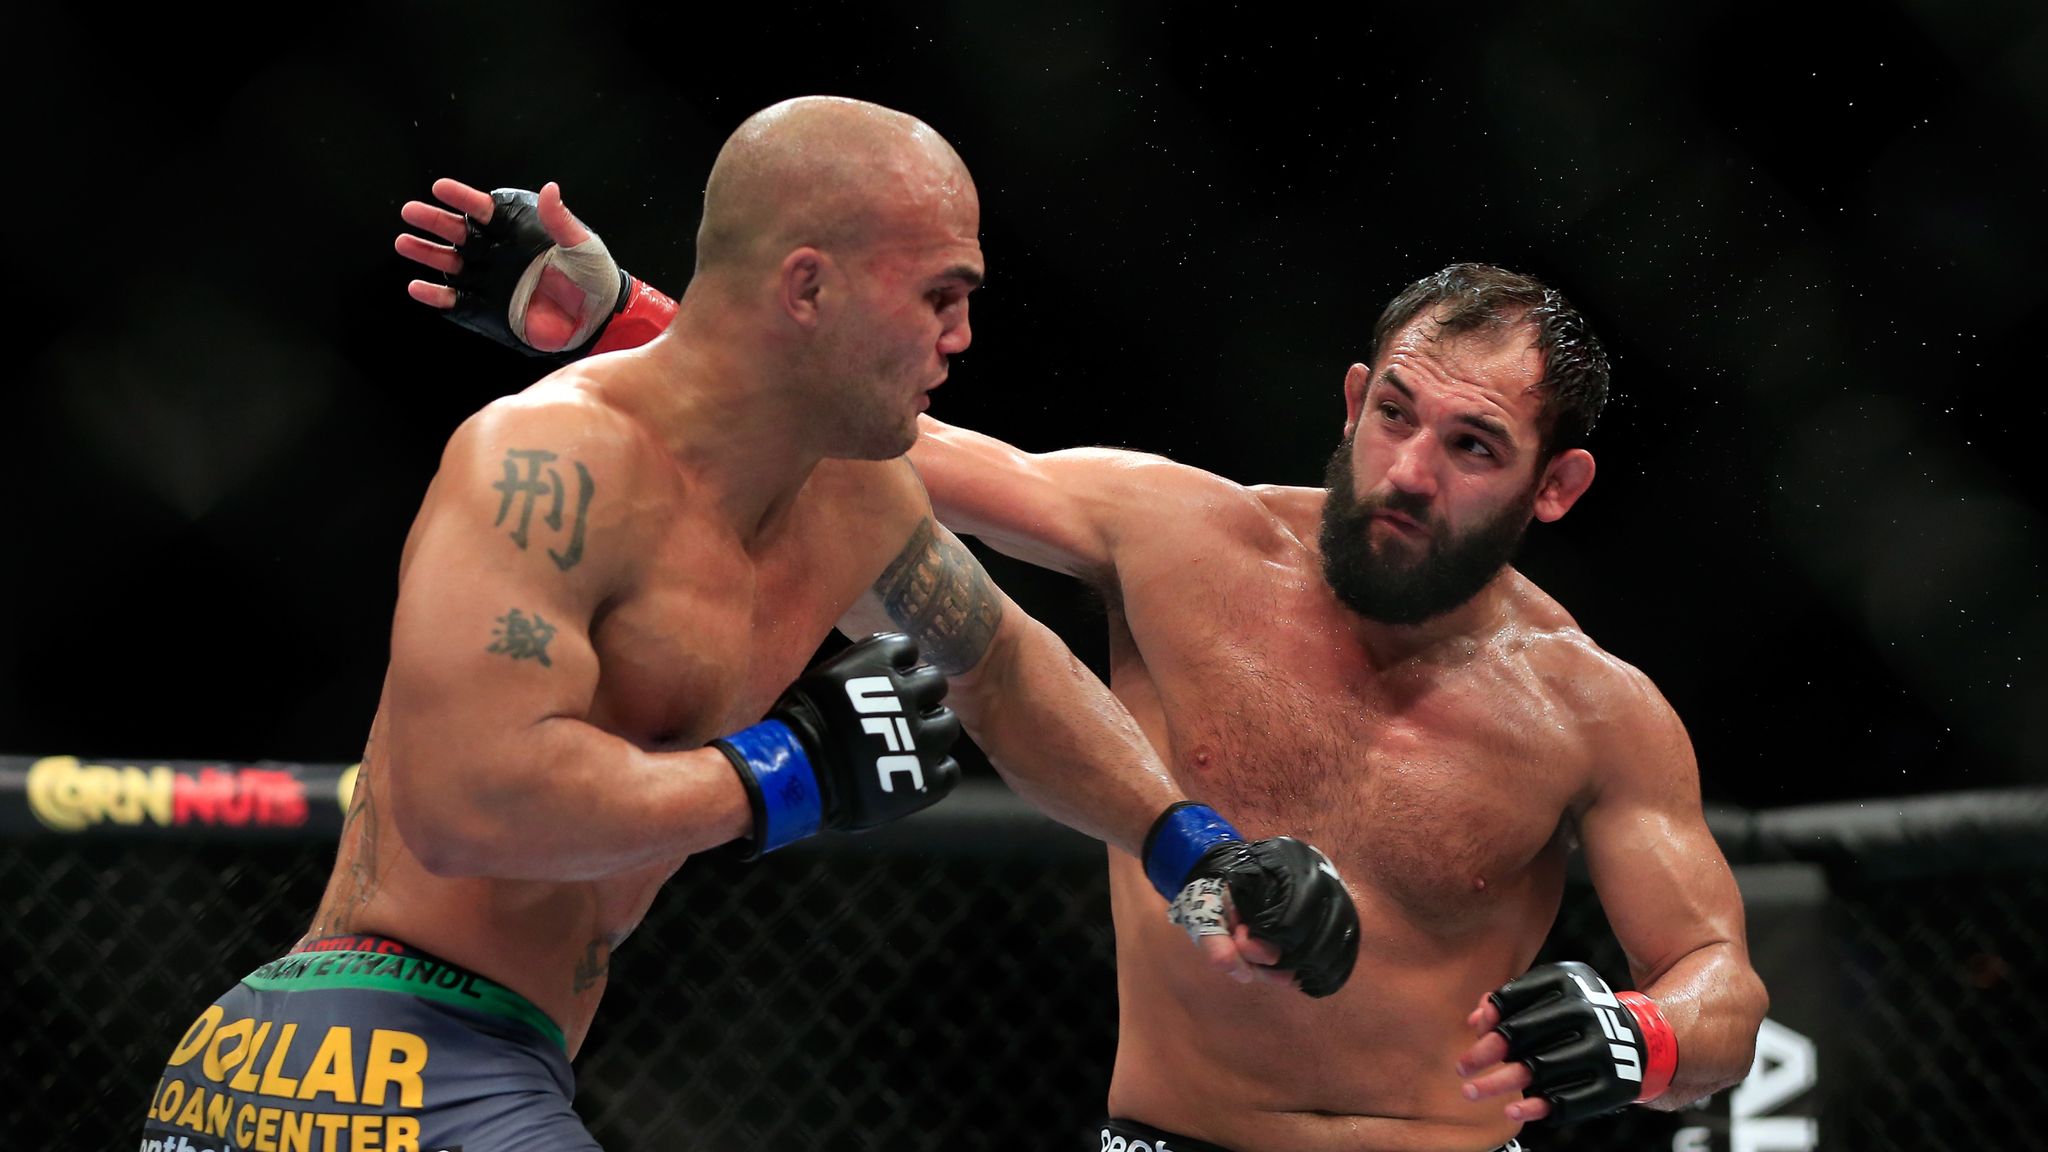 Johny Hendricks discusses UFC rivals Robbie Lawler and Carlos Condit